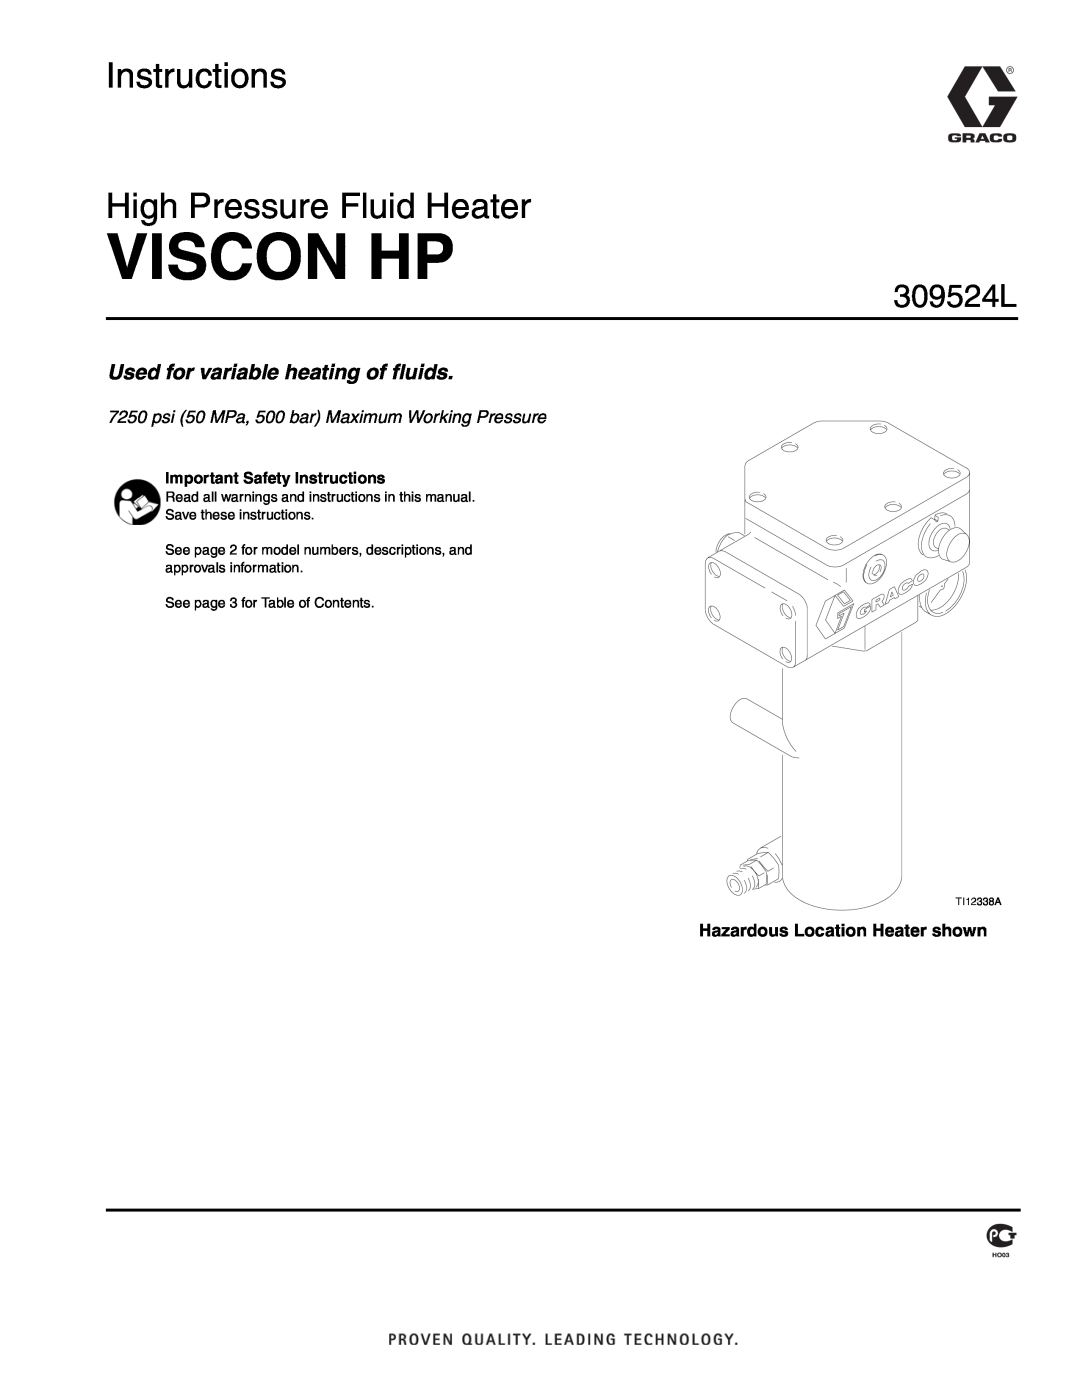 Graco 309524L important safety instructions Hazardous Location Heater shown, Viscon Hp, Important Safety Instructions 